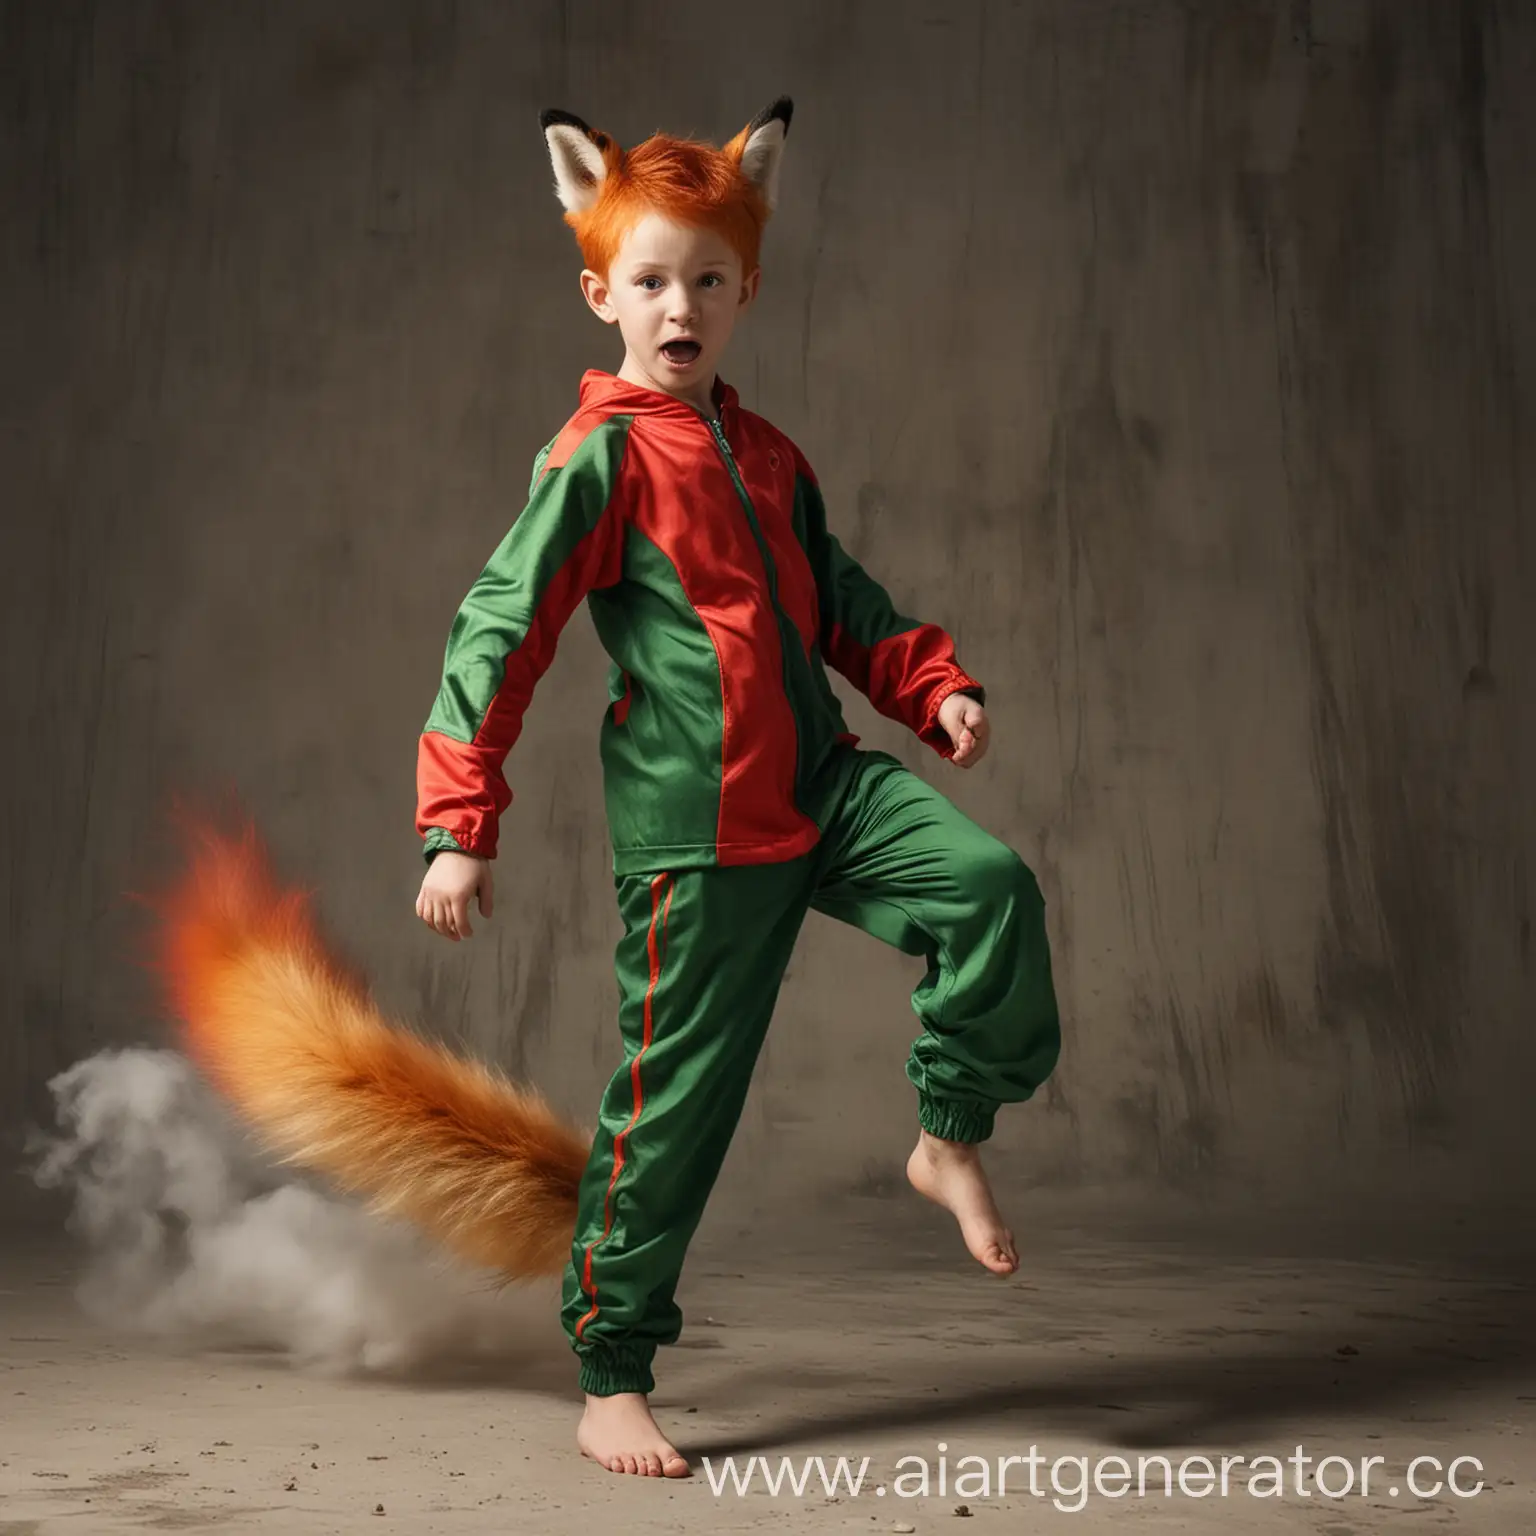 Redhaired-Boy-with-Fox-Tail-and-Elemental-Powers